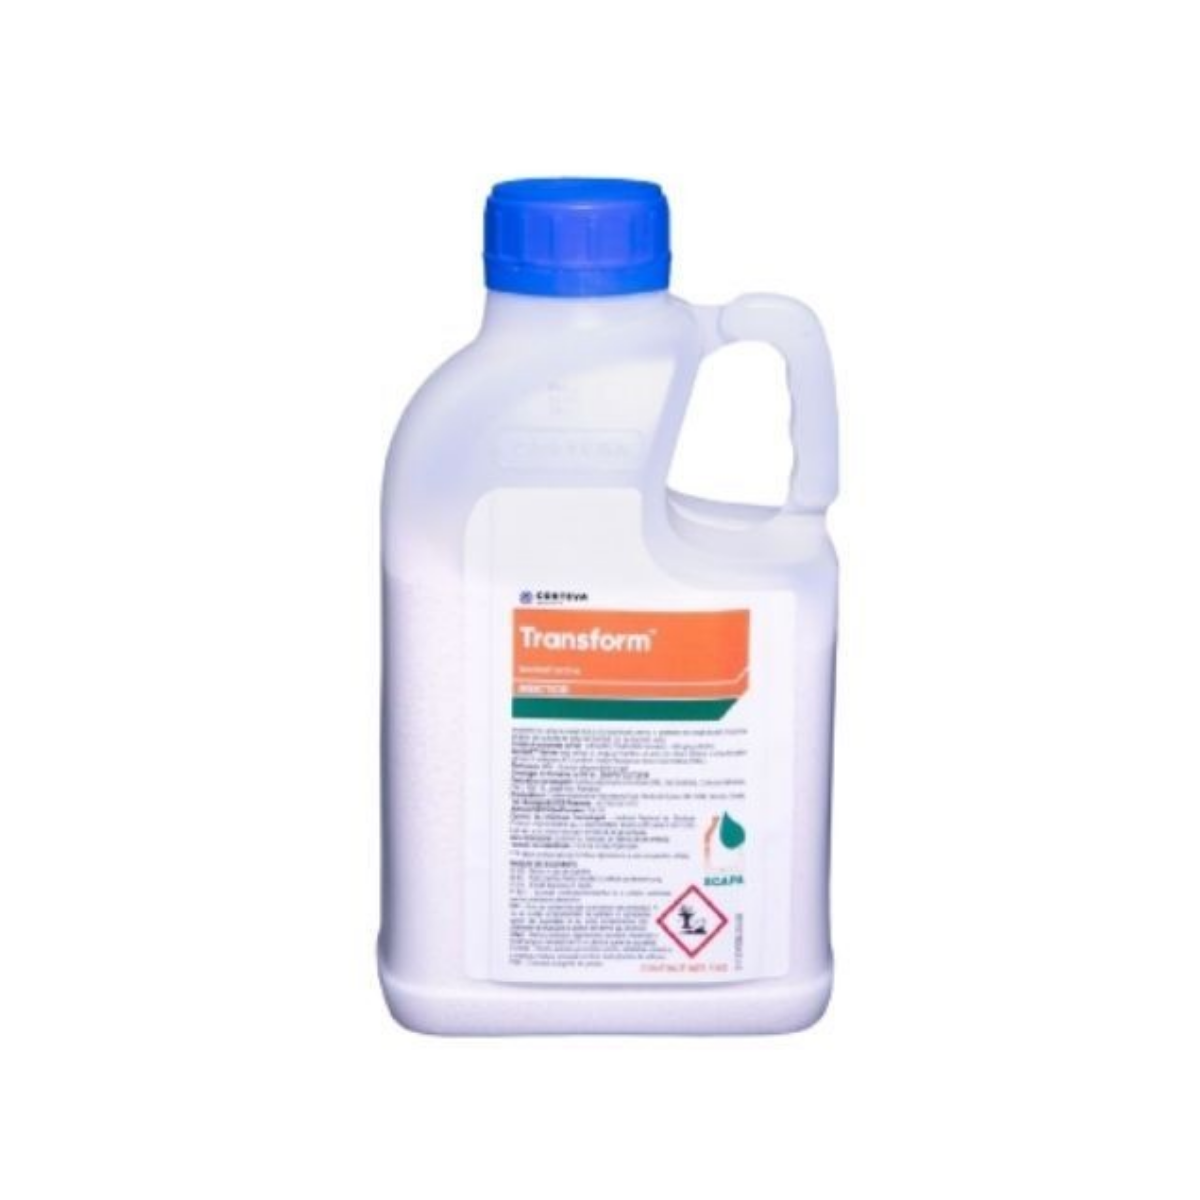 Insecticide - Insecticid grau, orz, ovaz Transform, 1 Kg, hectarul.ro